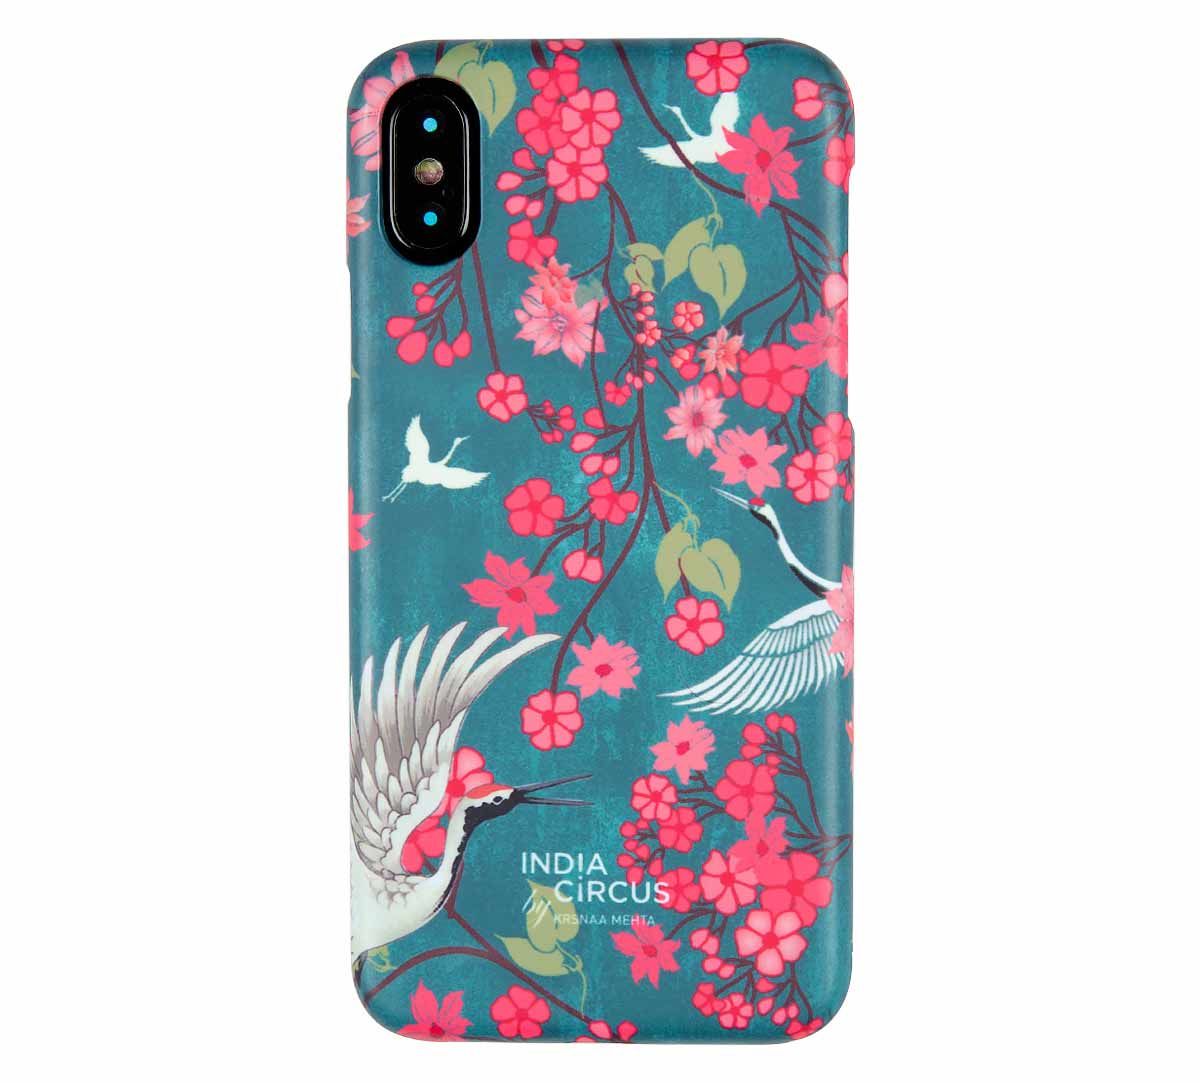 Buy designer iPhone X covers online on India Circus